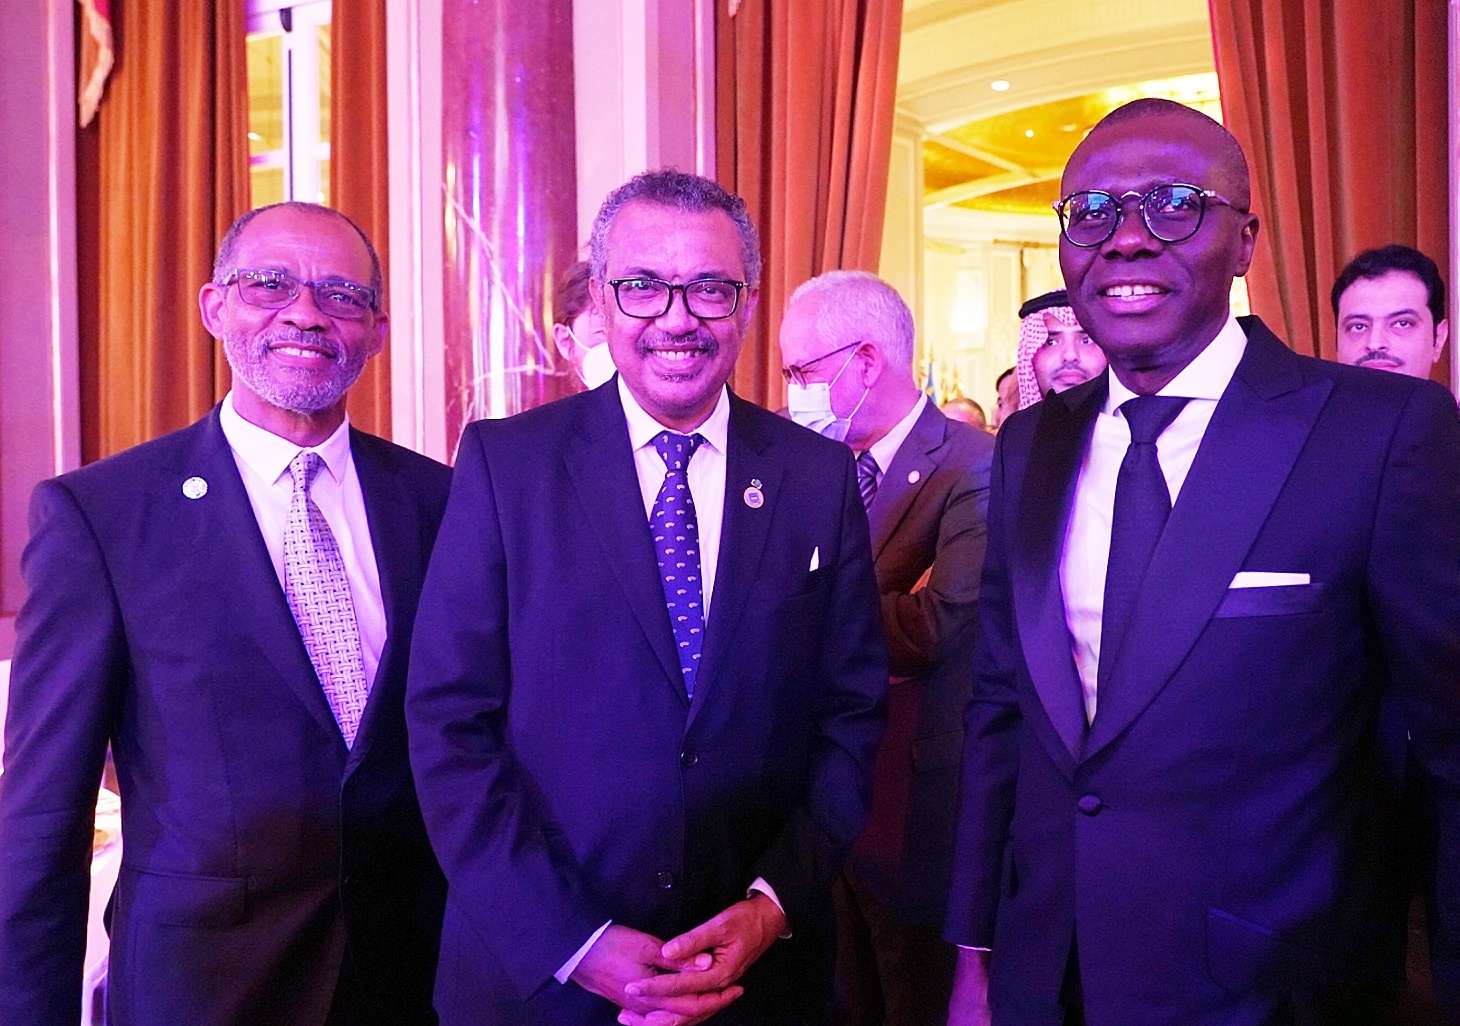 SANWO-OLU ATTENDS EUROPEAN CORPORATE COUNCIL AND MIDDLE EAST SUMMIT